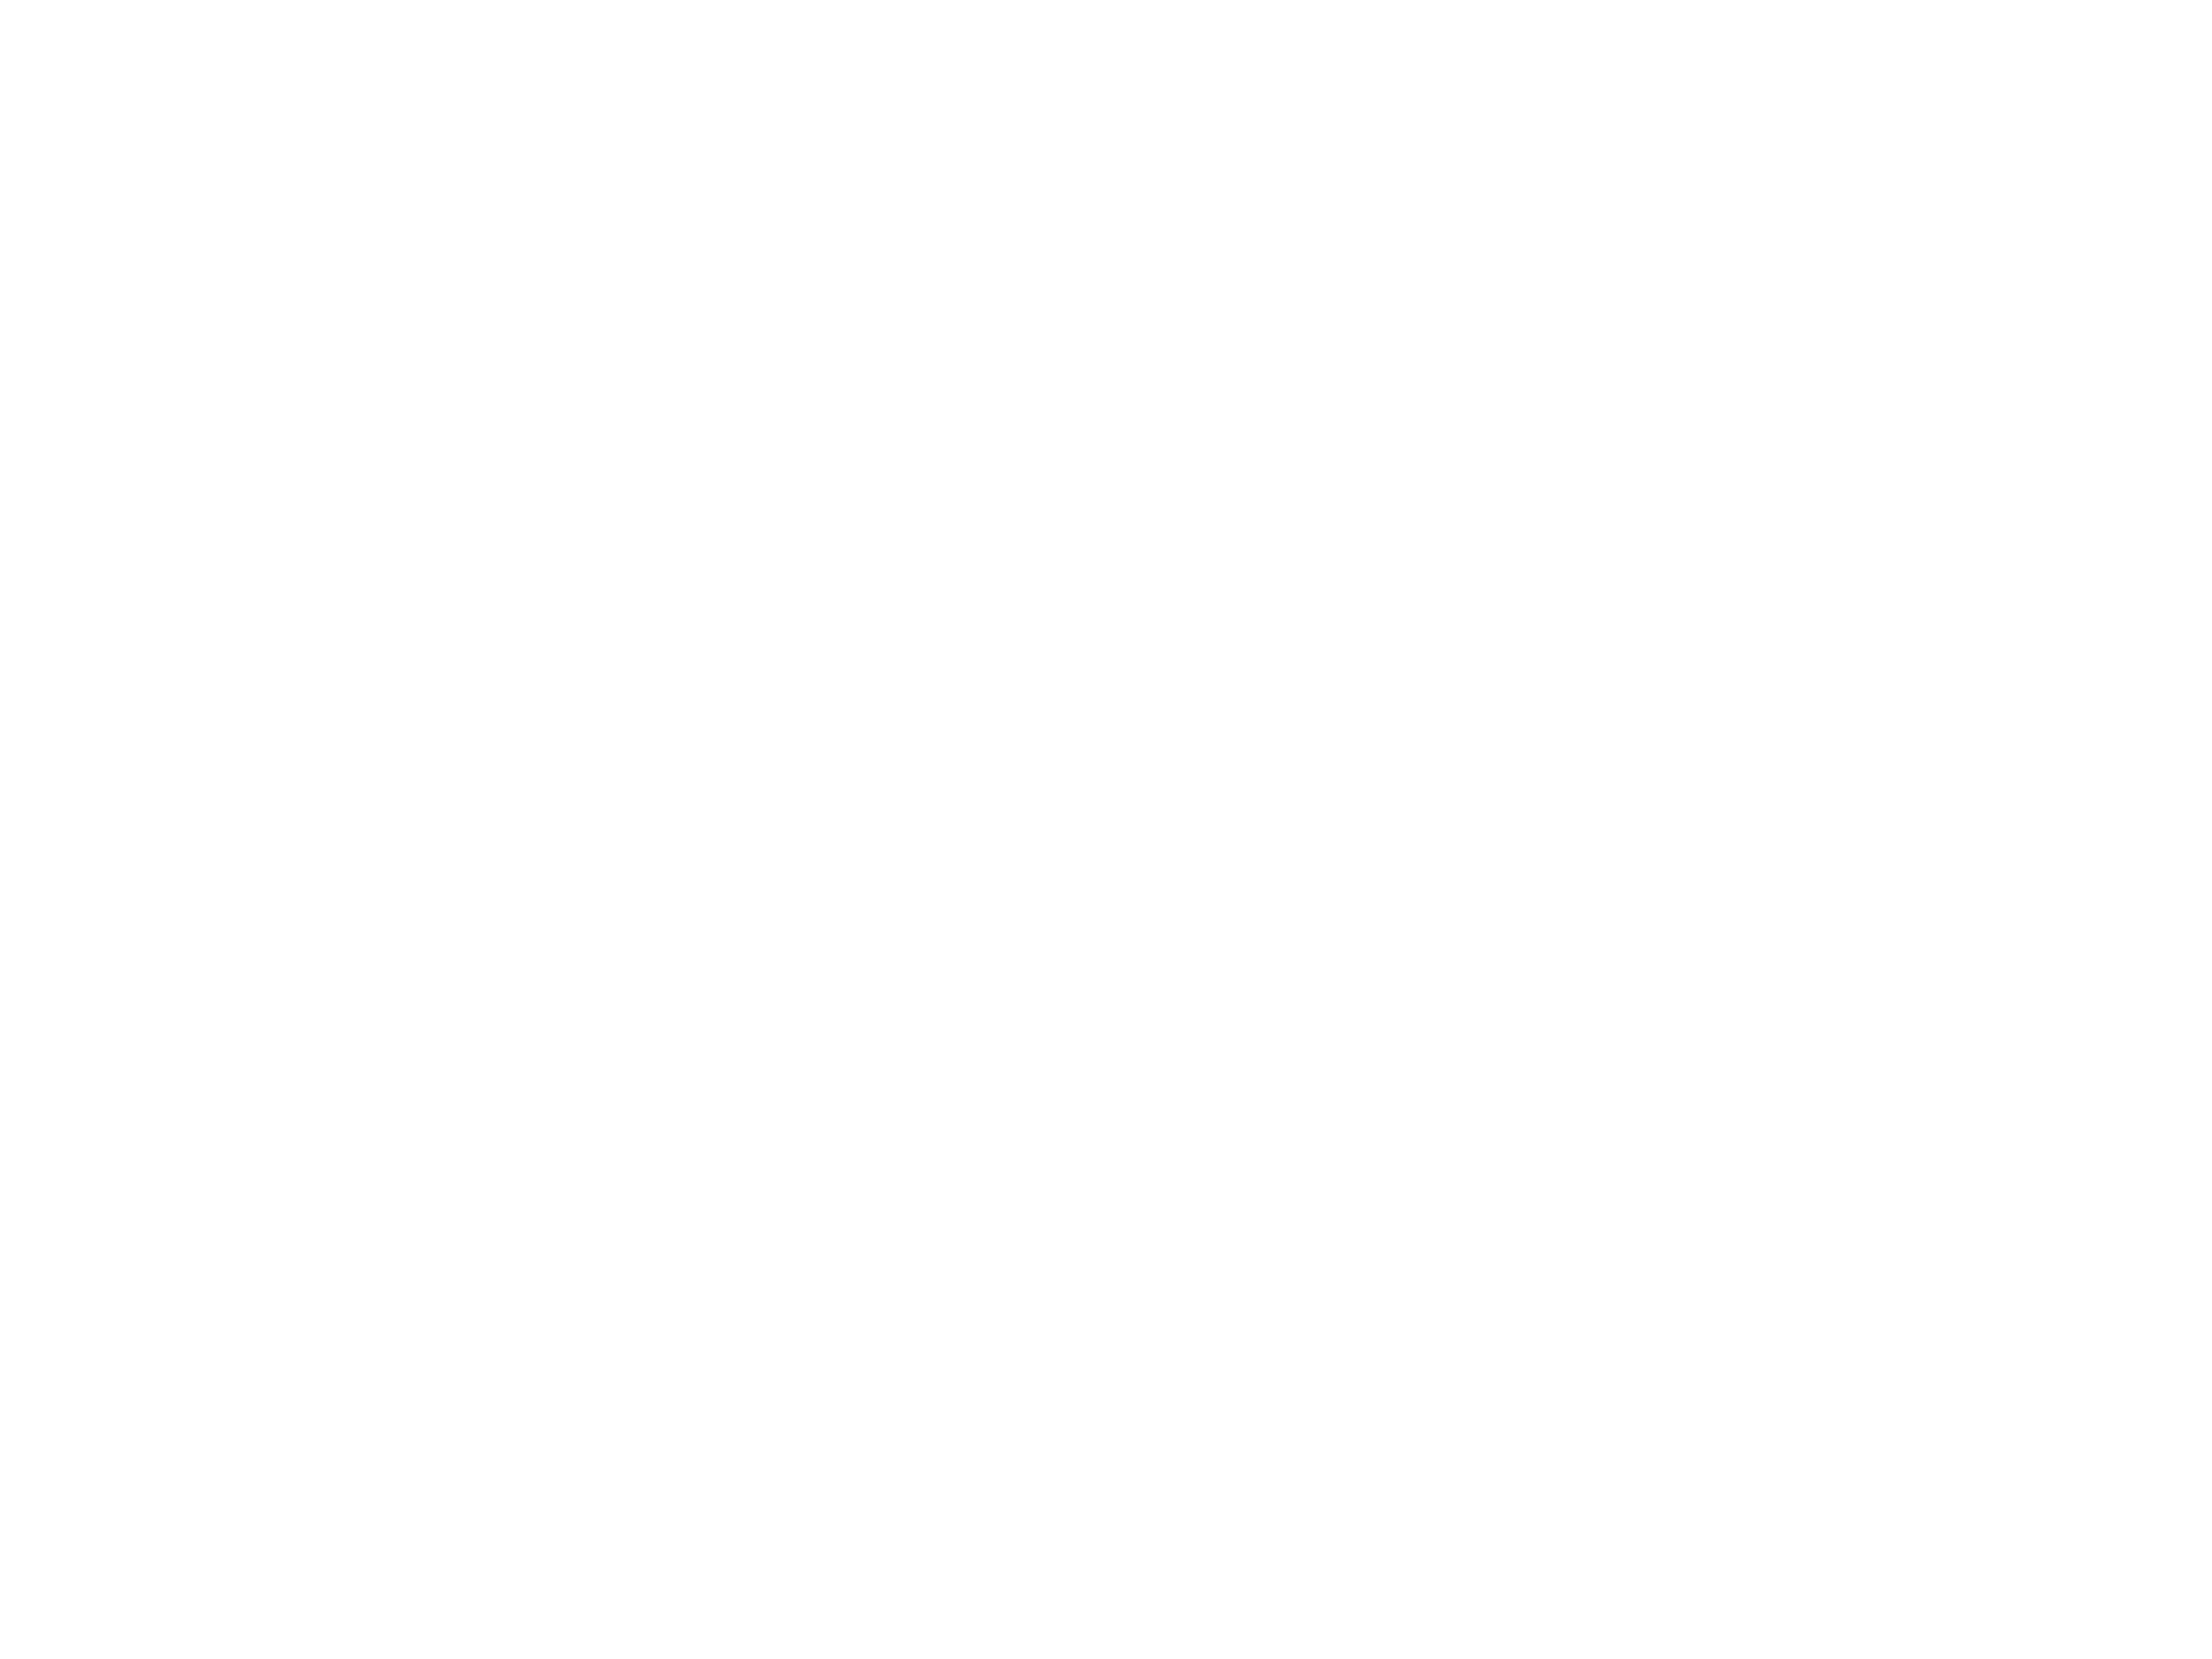 The One Show award logo „Independent agency of the year 2020“  white lettering on black background